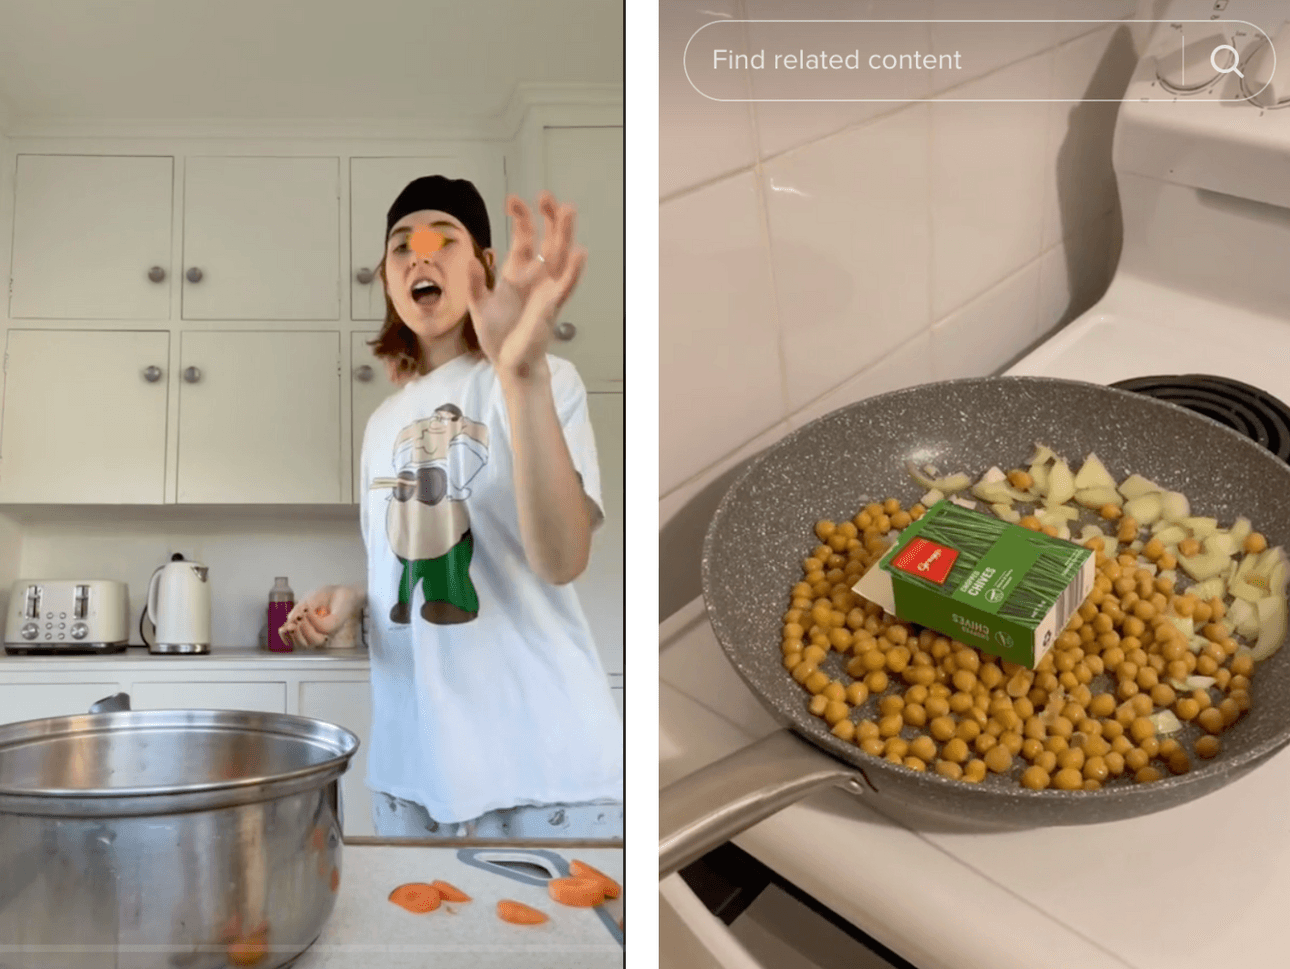 Two screenshots from Fudgeywudgeychef's Tiktok videos. The first shows Fudgeywudgeychef in the kitchen throwing a piece of carrot into a pot, the second image shows a pan filled with chickpeas, onions and a box of dried chives, yes, the actual box.